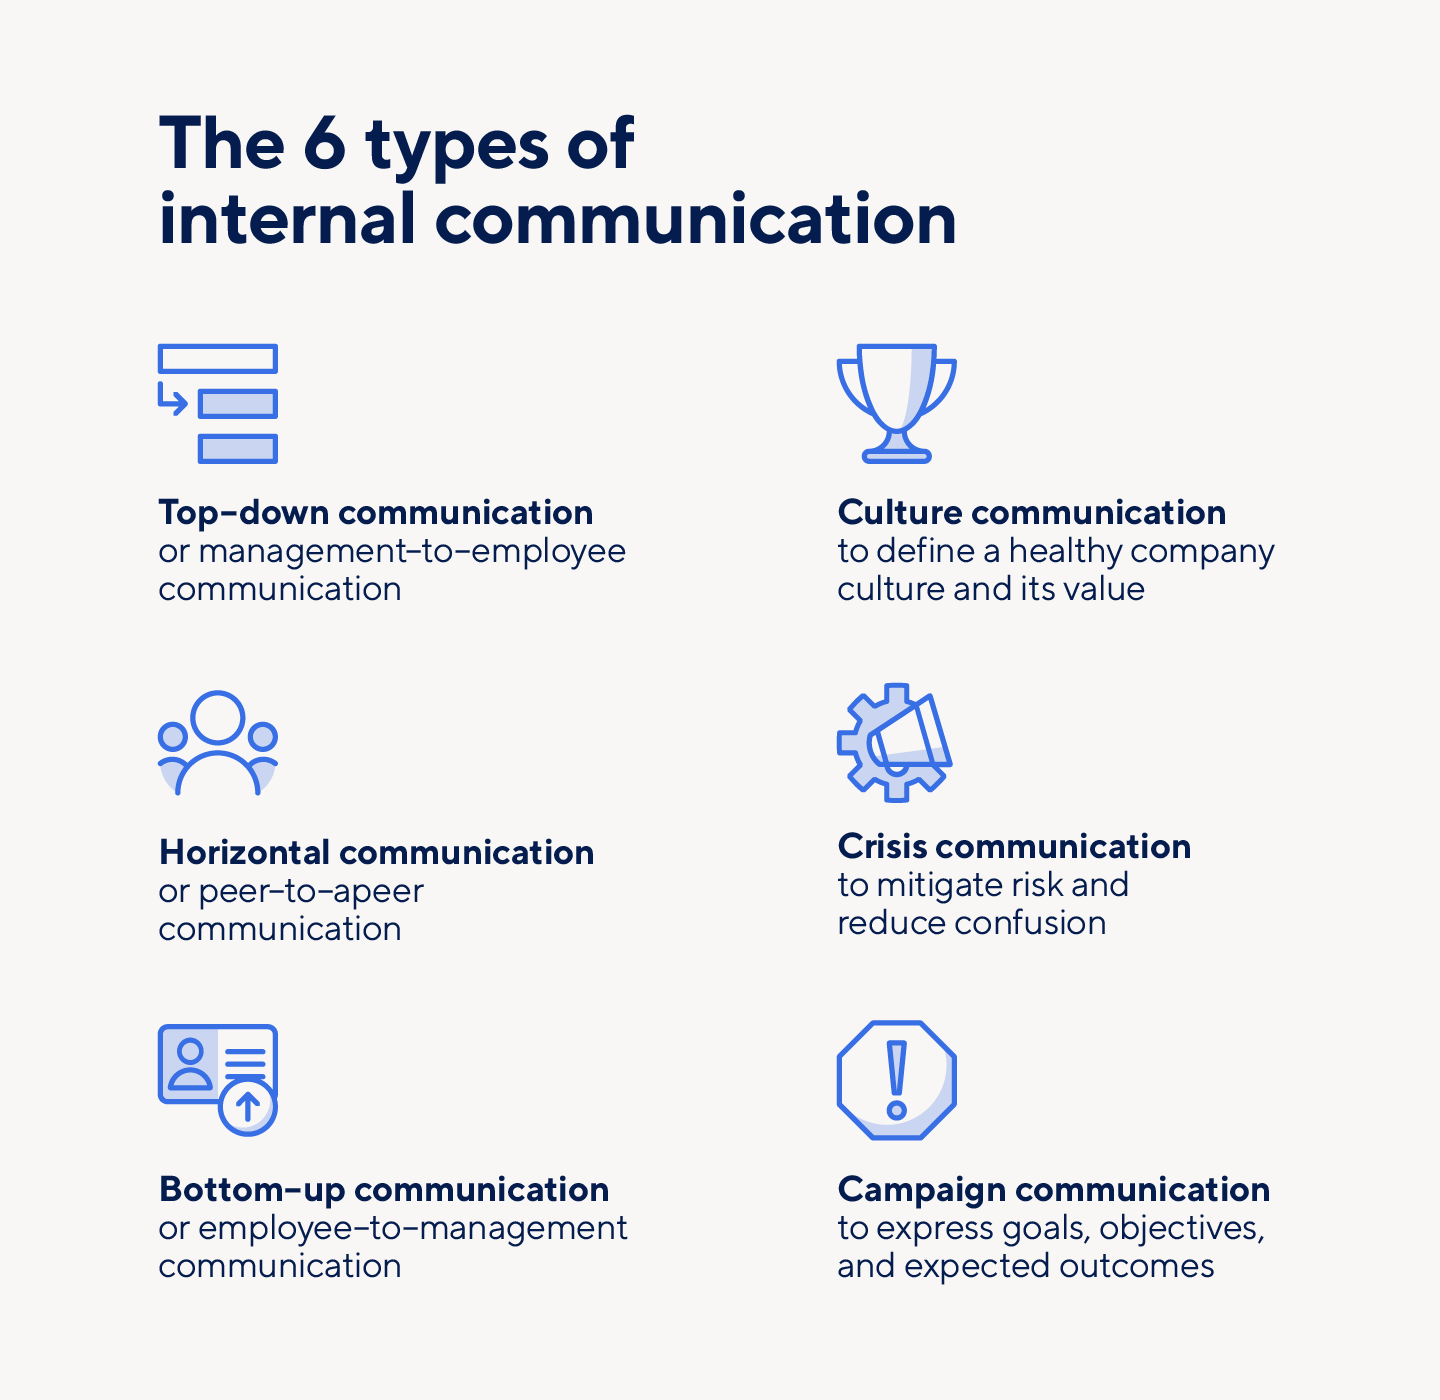 The types of internal communication include top-down, horizontal, bottom-up, crisis, culture, and campaign communication.